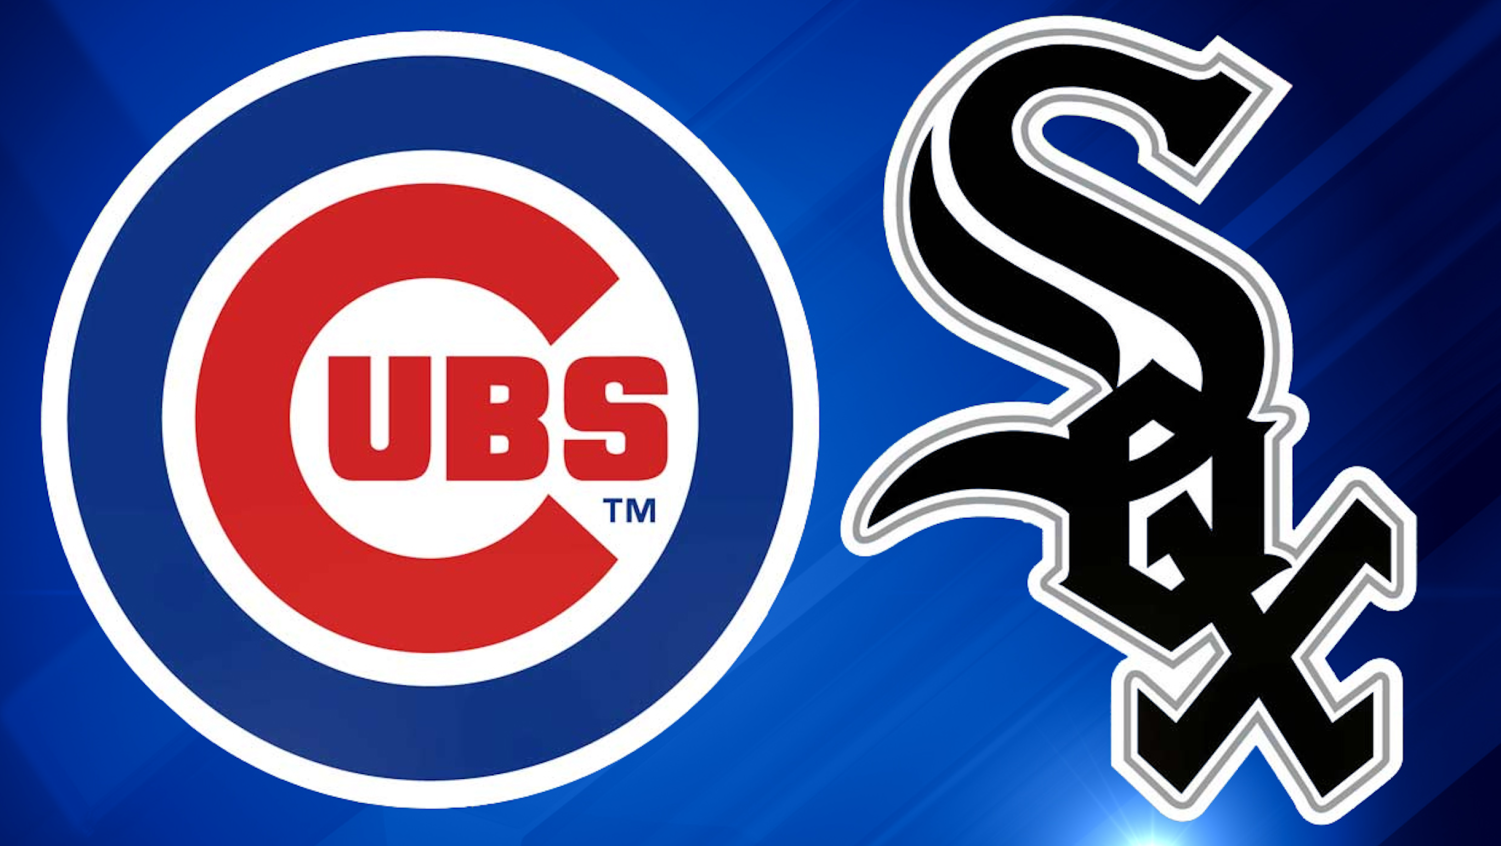 White Sox Fans Are Smarter Than Cubs Fans: Study